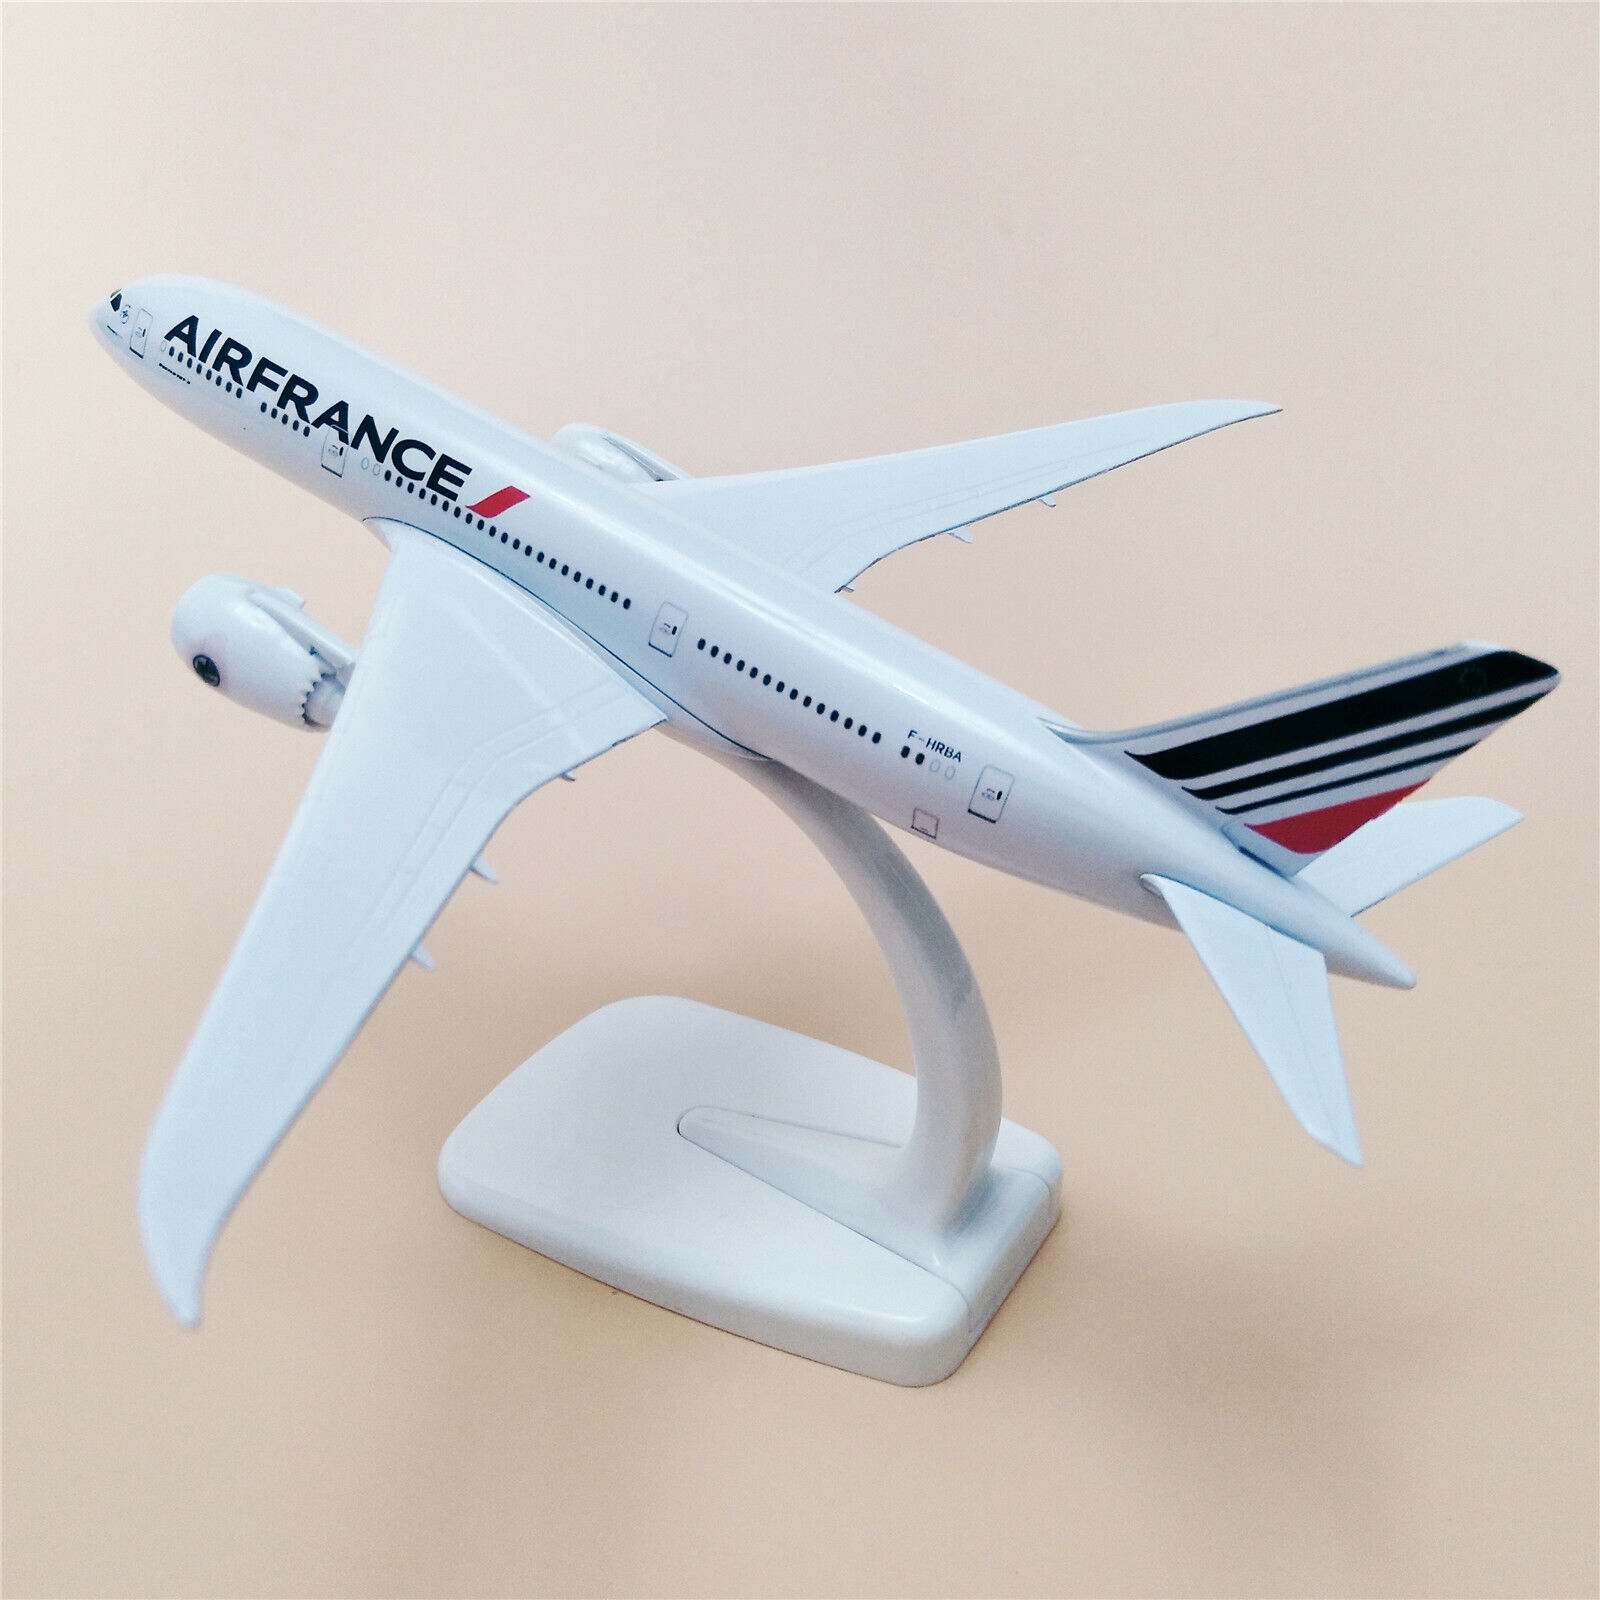 Air France Boeing B787 Airlines Diecast Airplane Model Plane Metal Aircraft 20cm